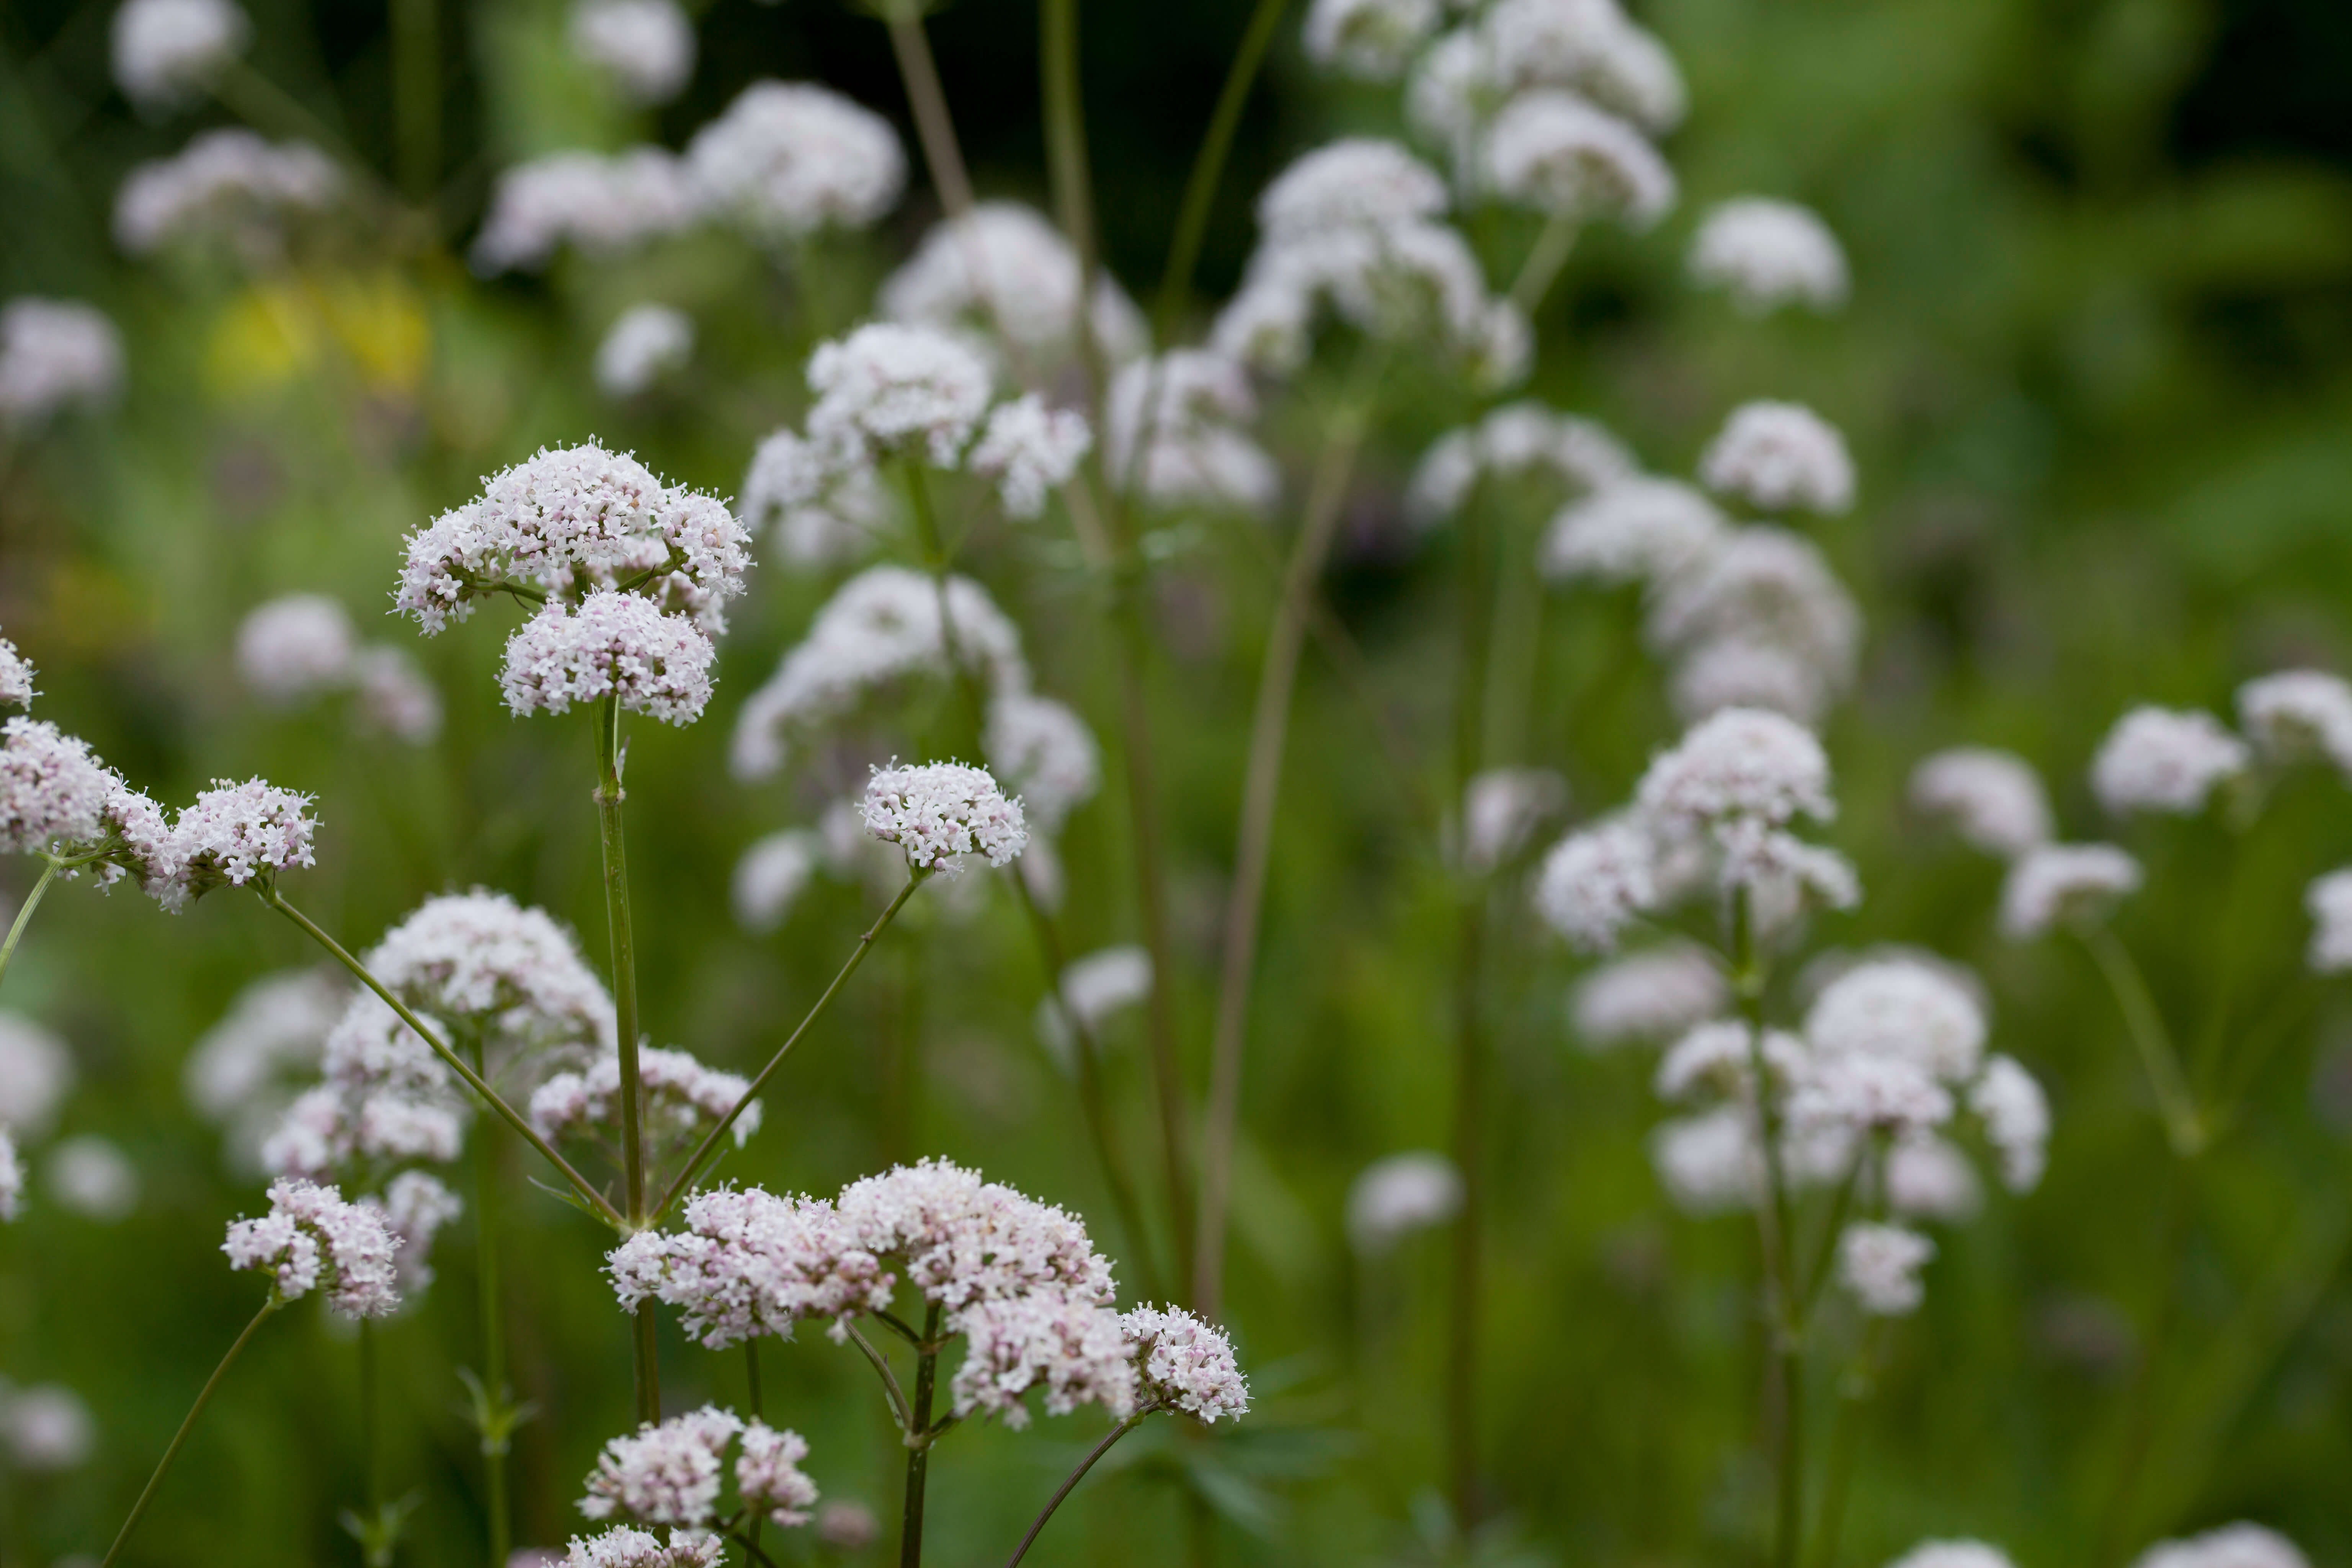 A close up image of the plant valeriana that is used to create the Valerian sleep supplement